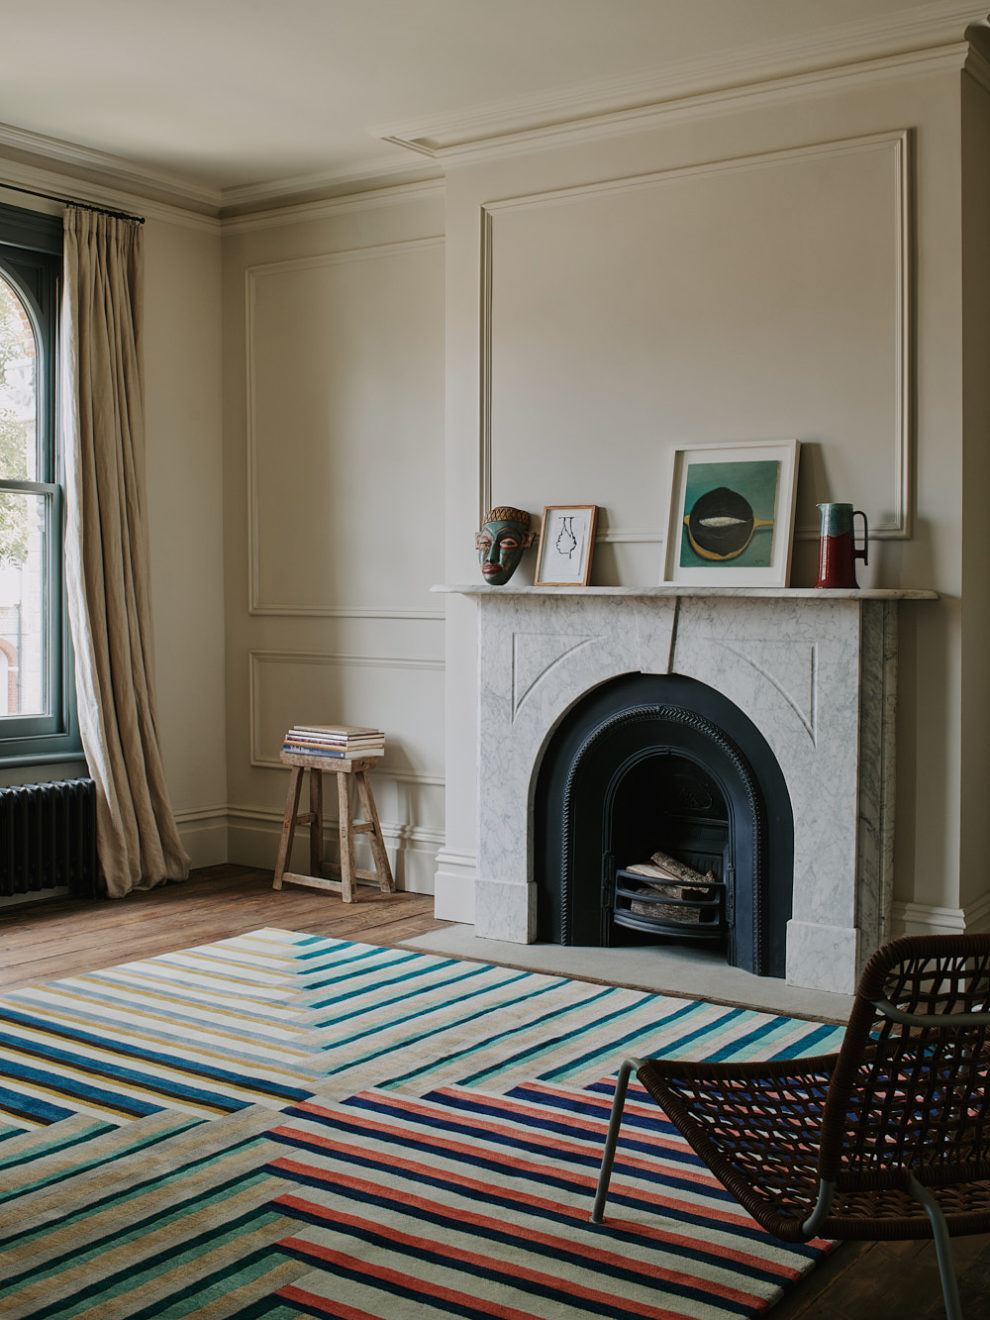 Vexillum - Margo- Selby - Photograph by Christopher Horwood - Christopher Farr Rugs - Aucoot Estate Agents - Design Directory